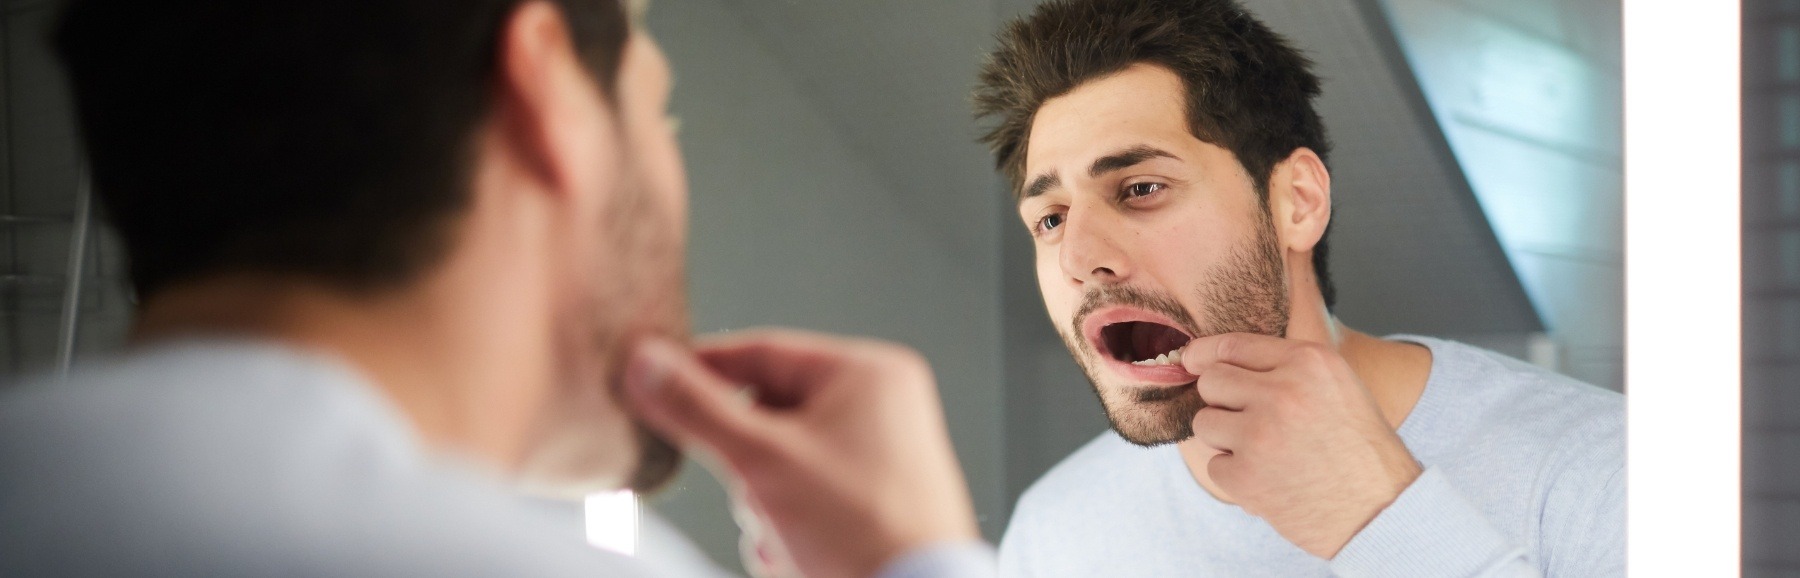 Man in need of emergency dentistry looking at his smile in the mirror